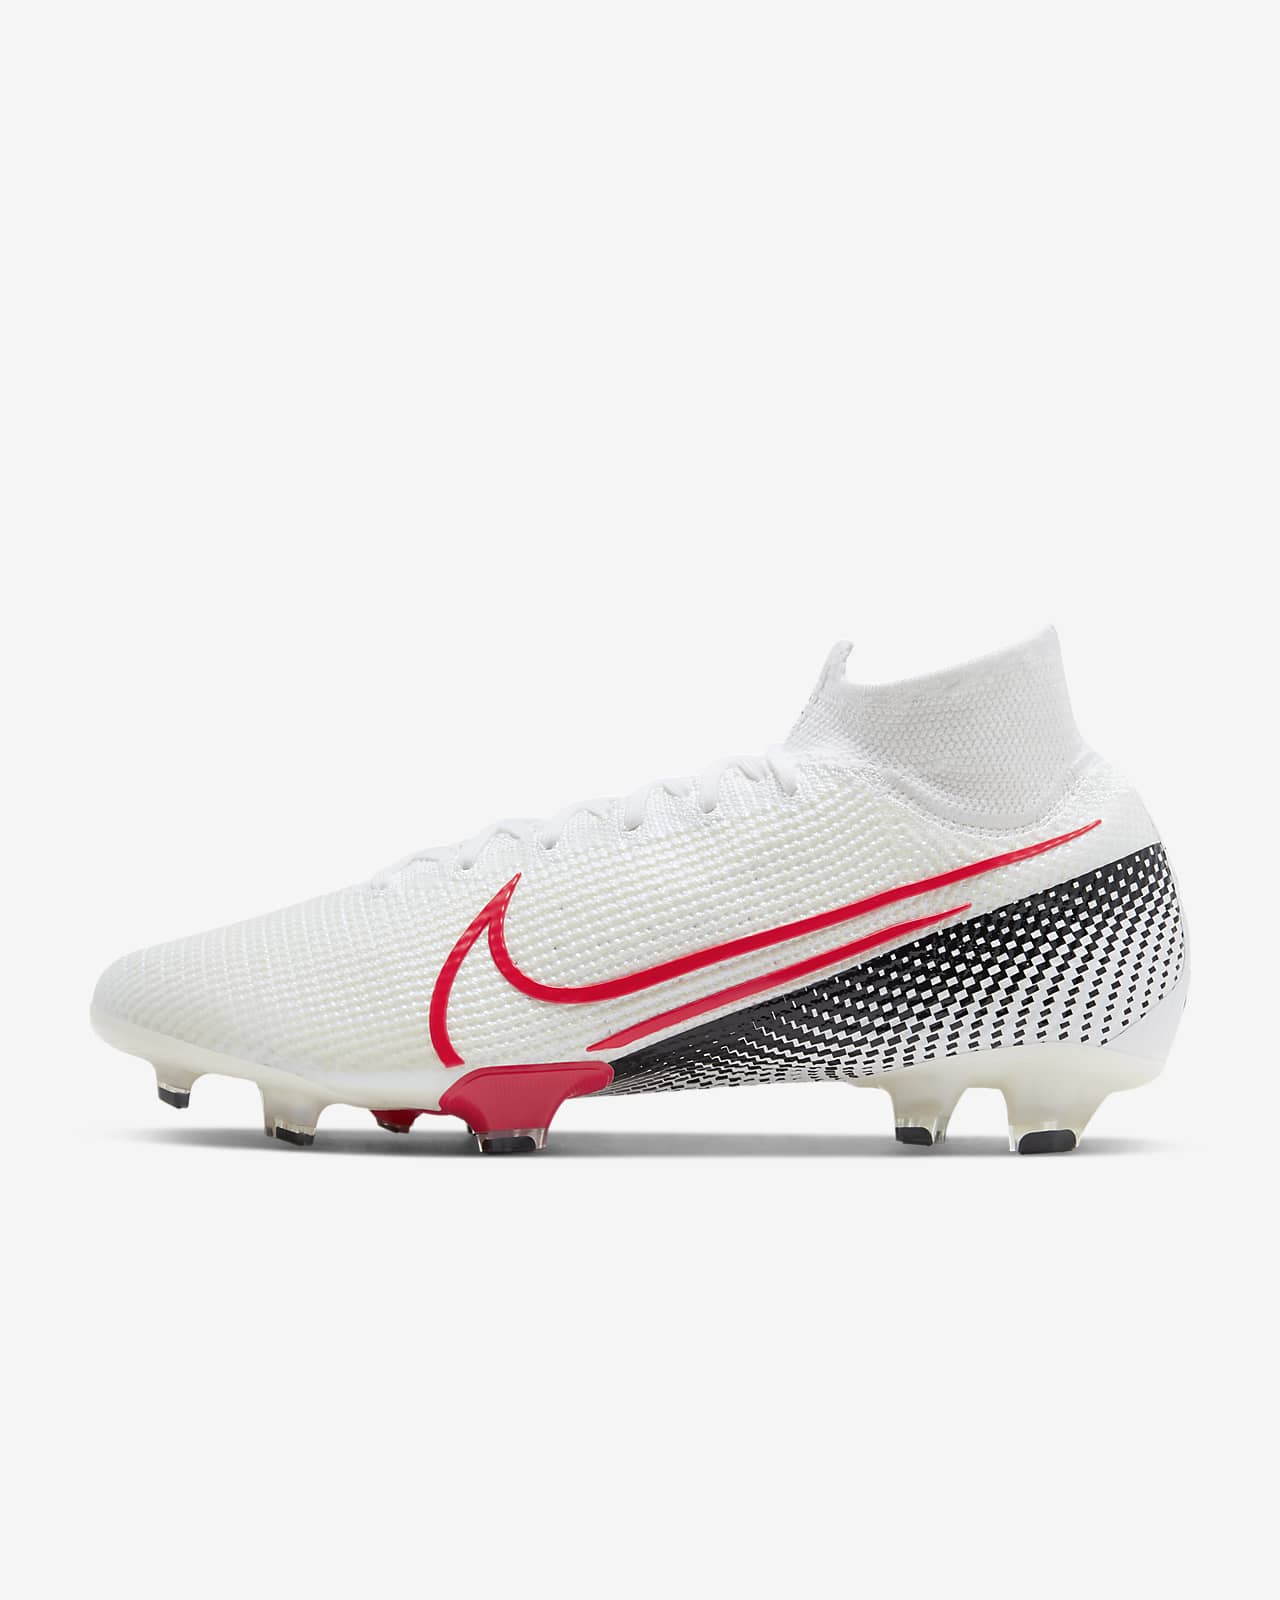 soccer shoes nike